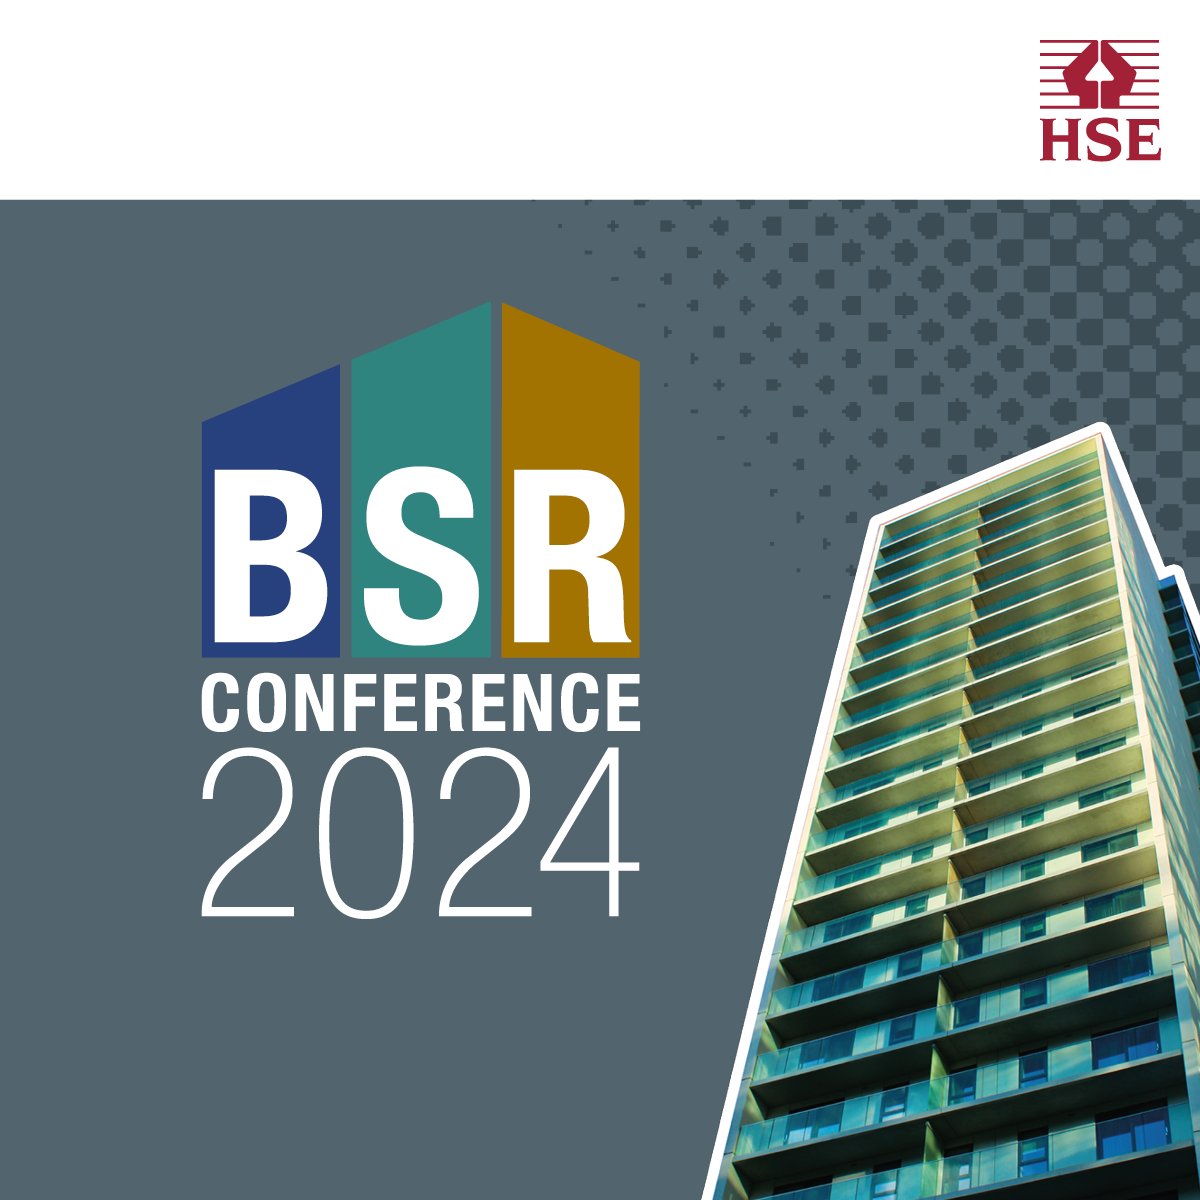 🔊 Attention attendees for the HSE #BSRconference 2024! Please take a moment to choose and book the sessions you want to attend for the upcoming event on May 21. Just visit the delegate log in: hsebuildingsafety24.co.uk/home/?utm_sour…